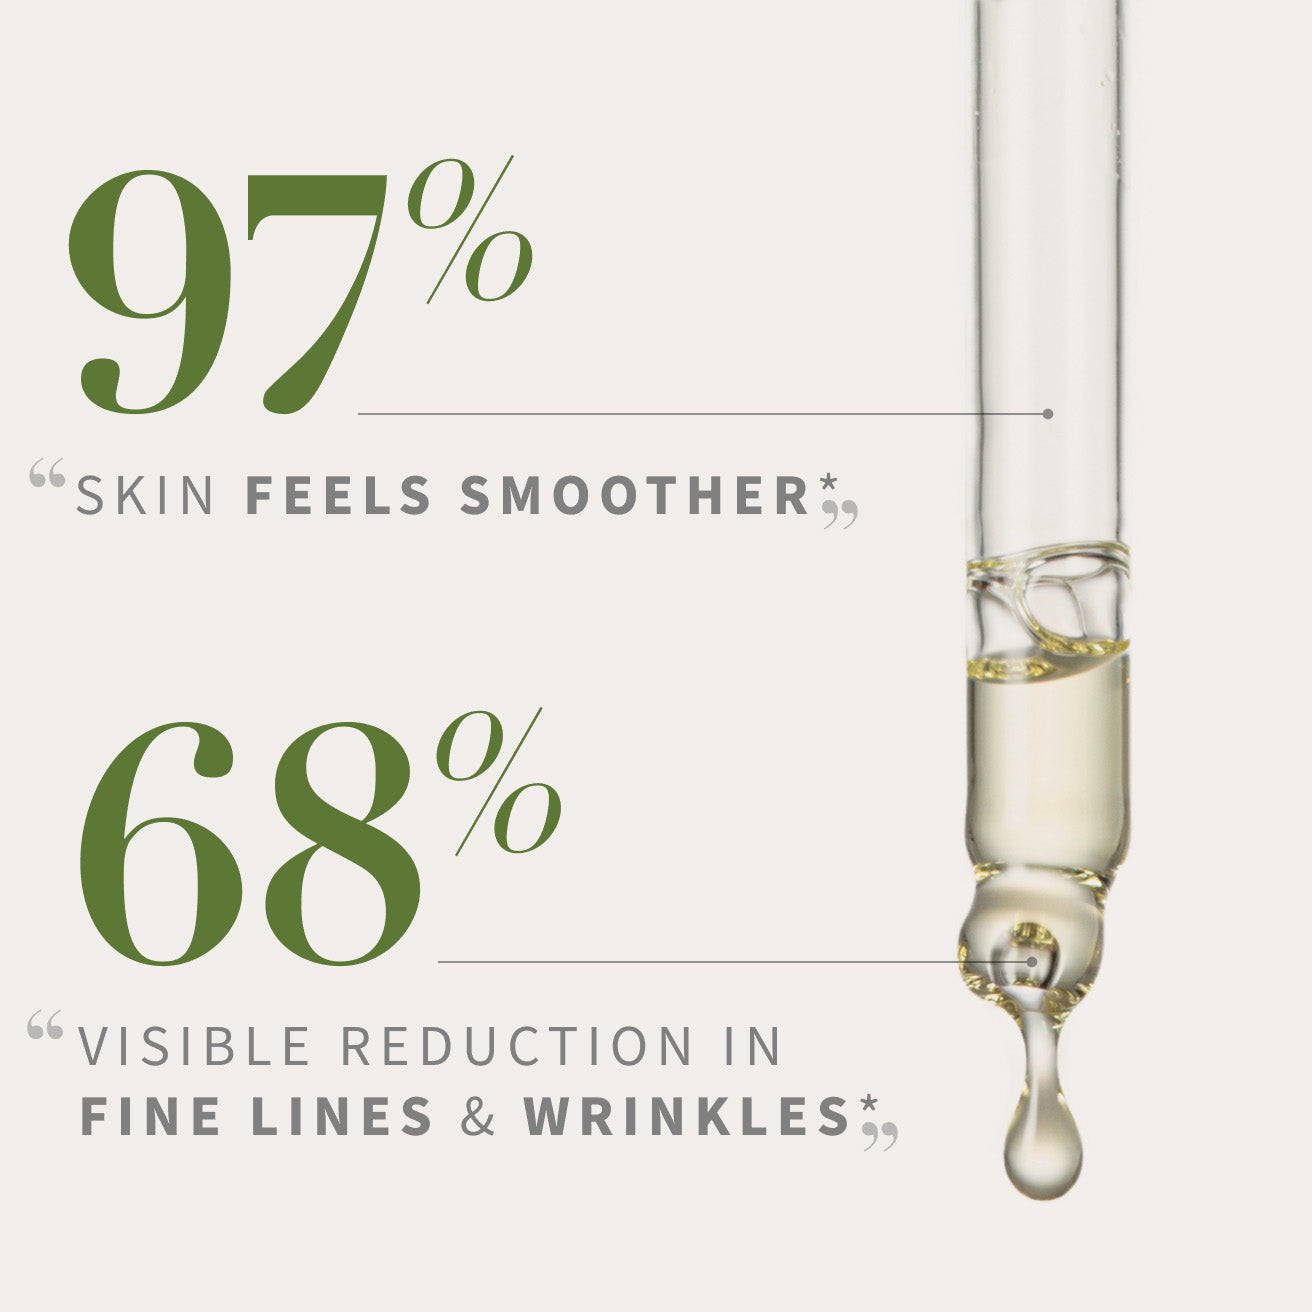 97% said skin feels smoother and 68% said visible reduction in fine lines. and wrinkles.